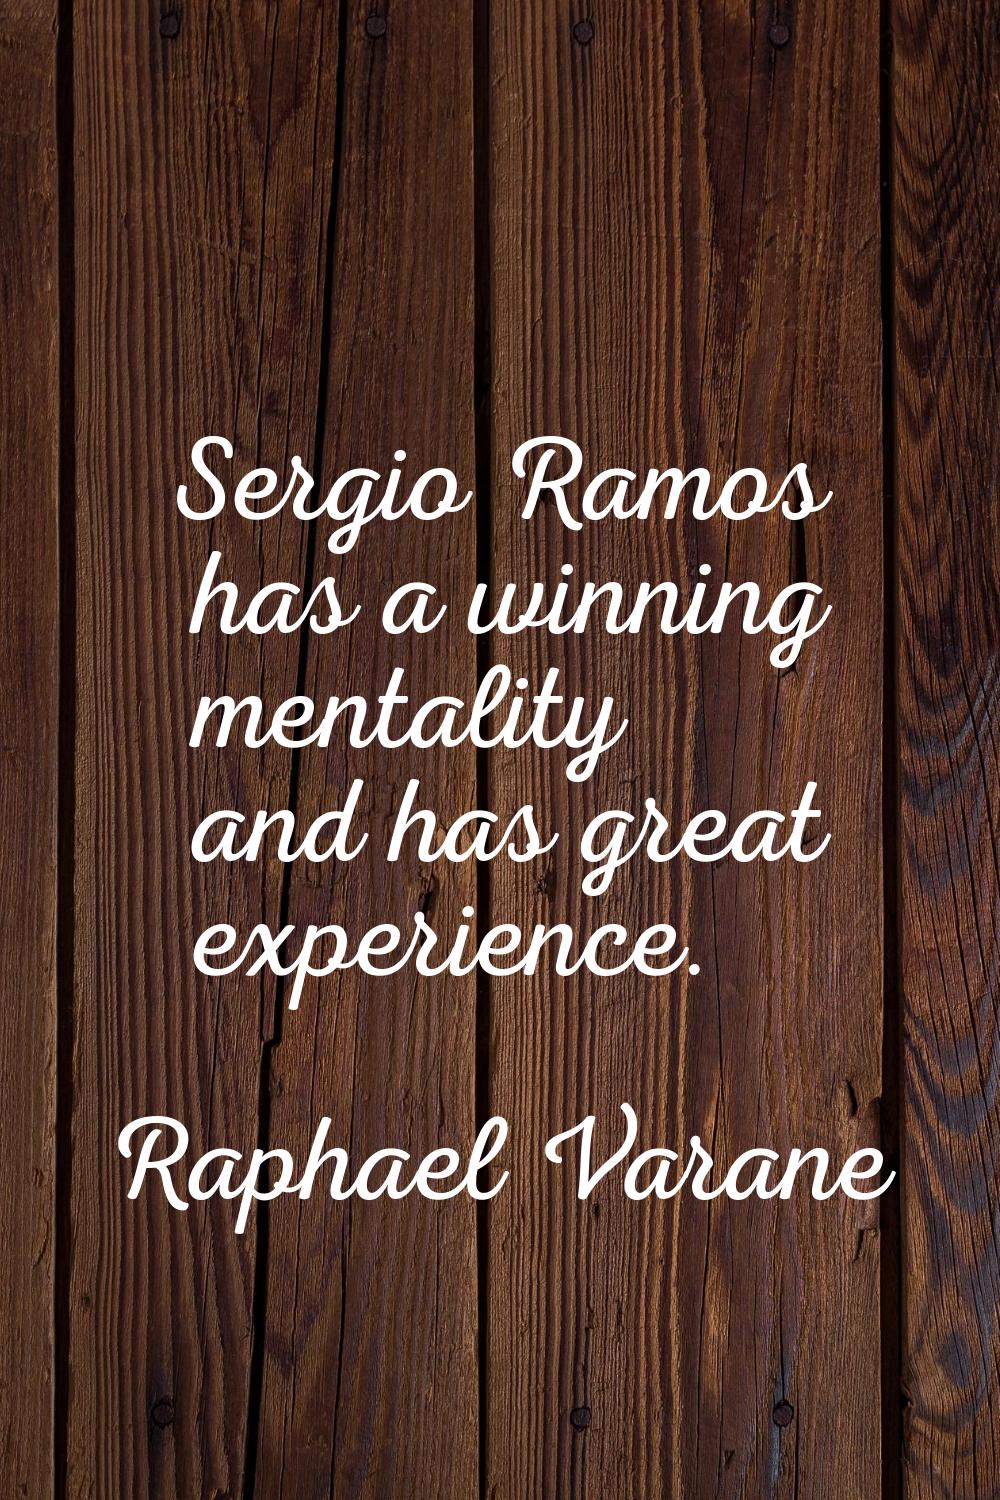 Sergio Ramos has a winning mentality and has great experience.